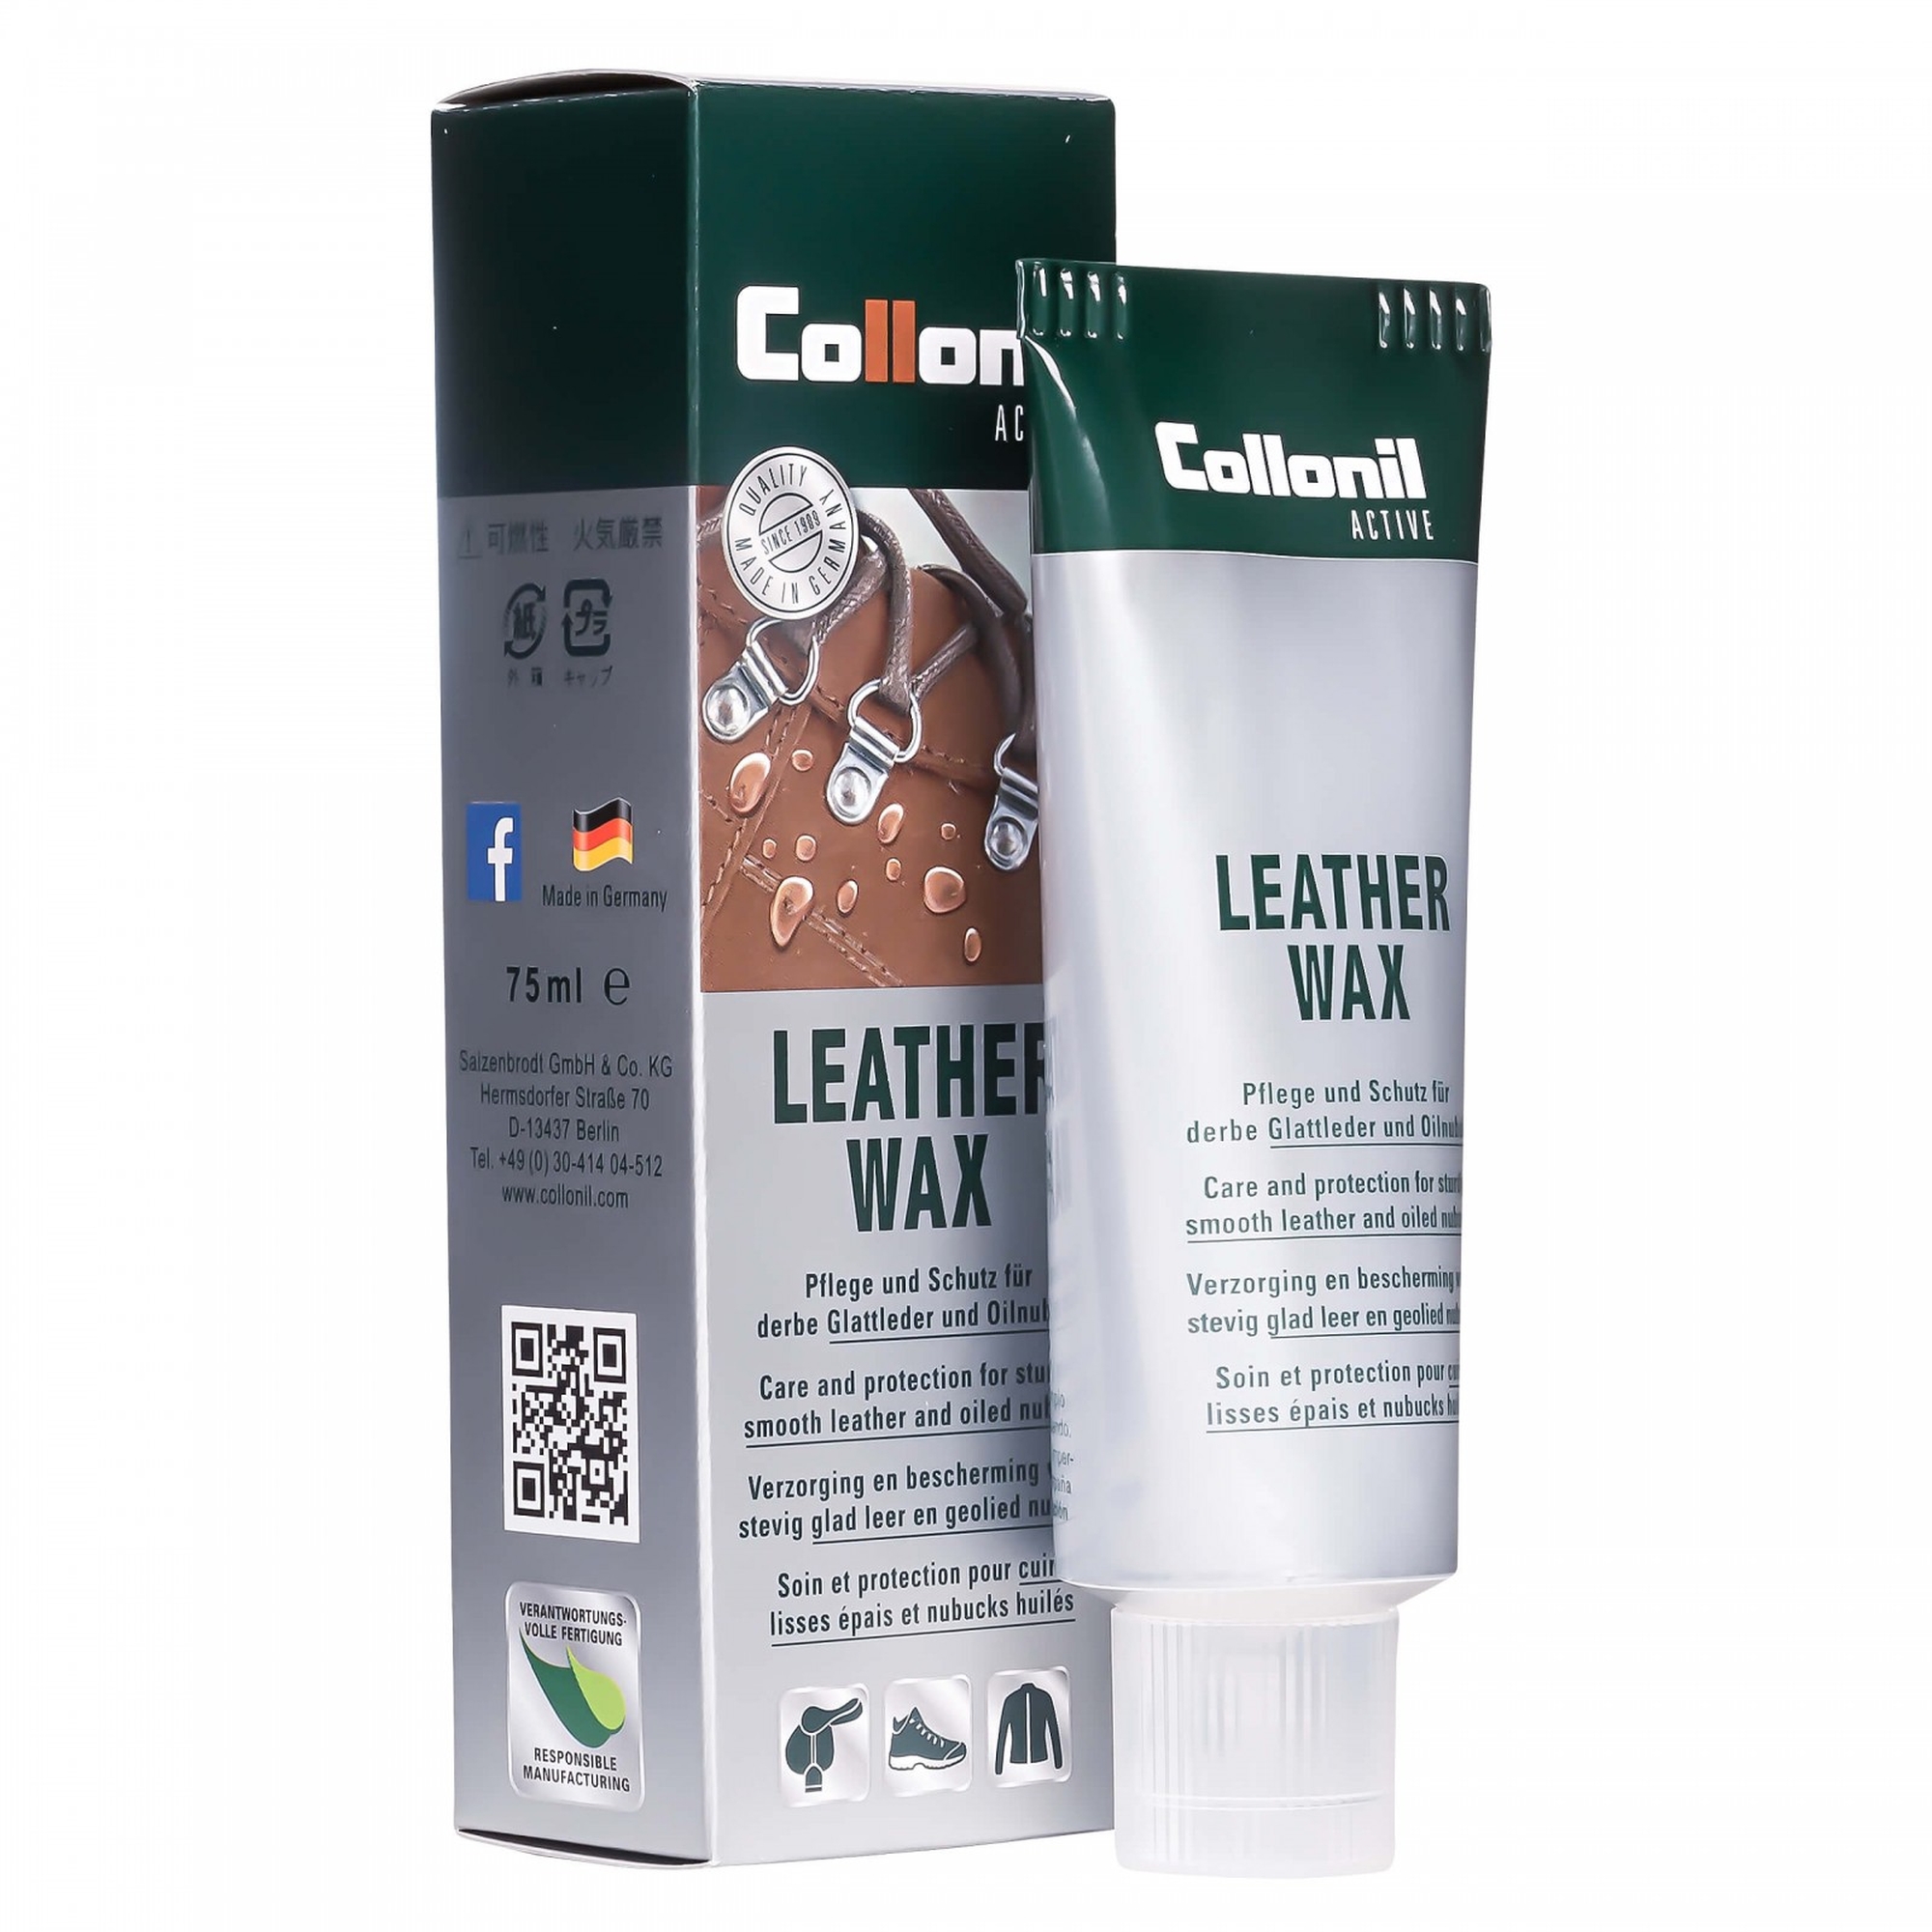 Collonil Active Leather Wax Tube 75 ml